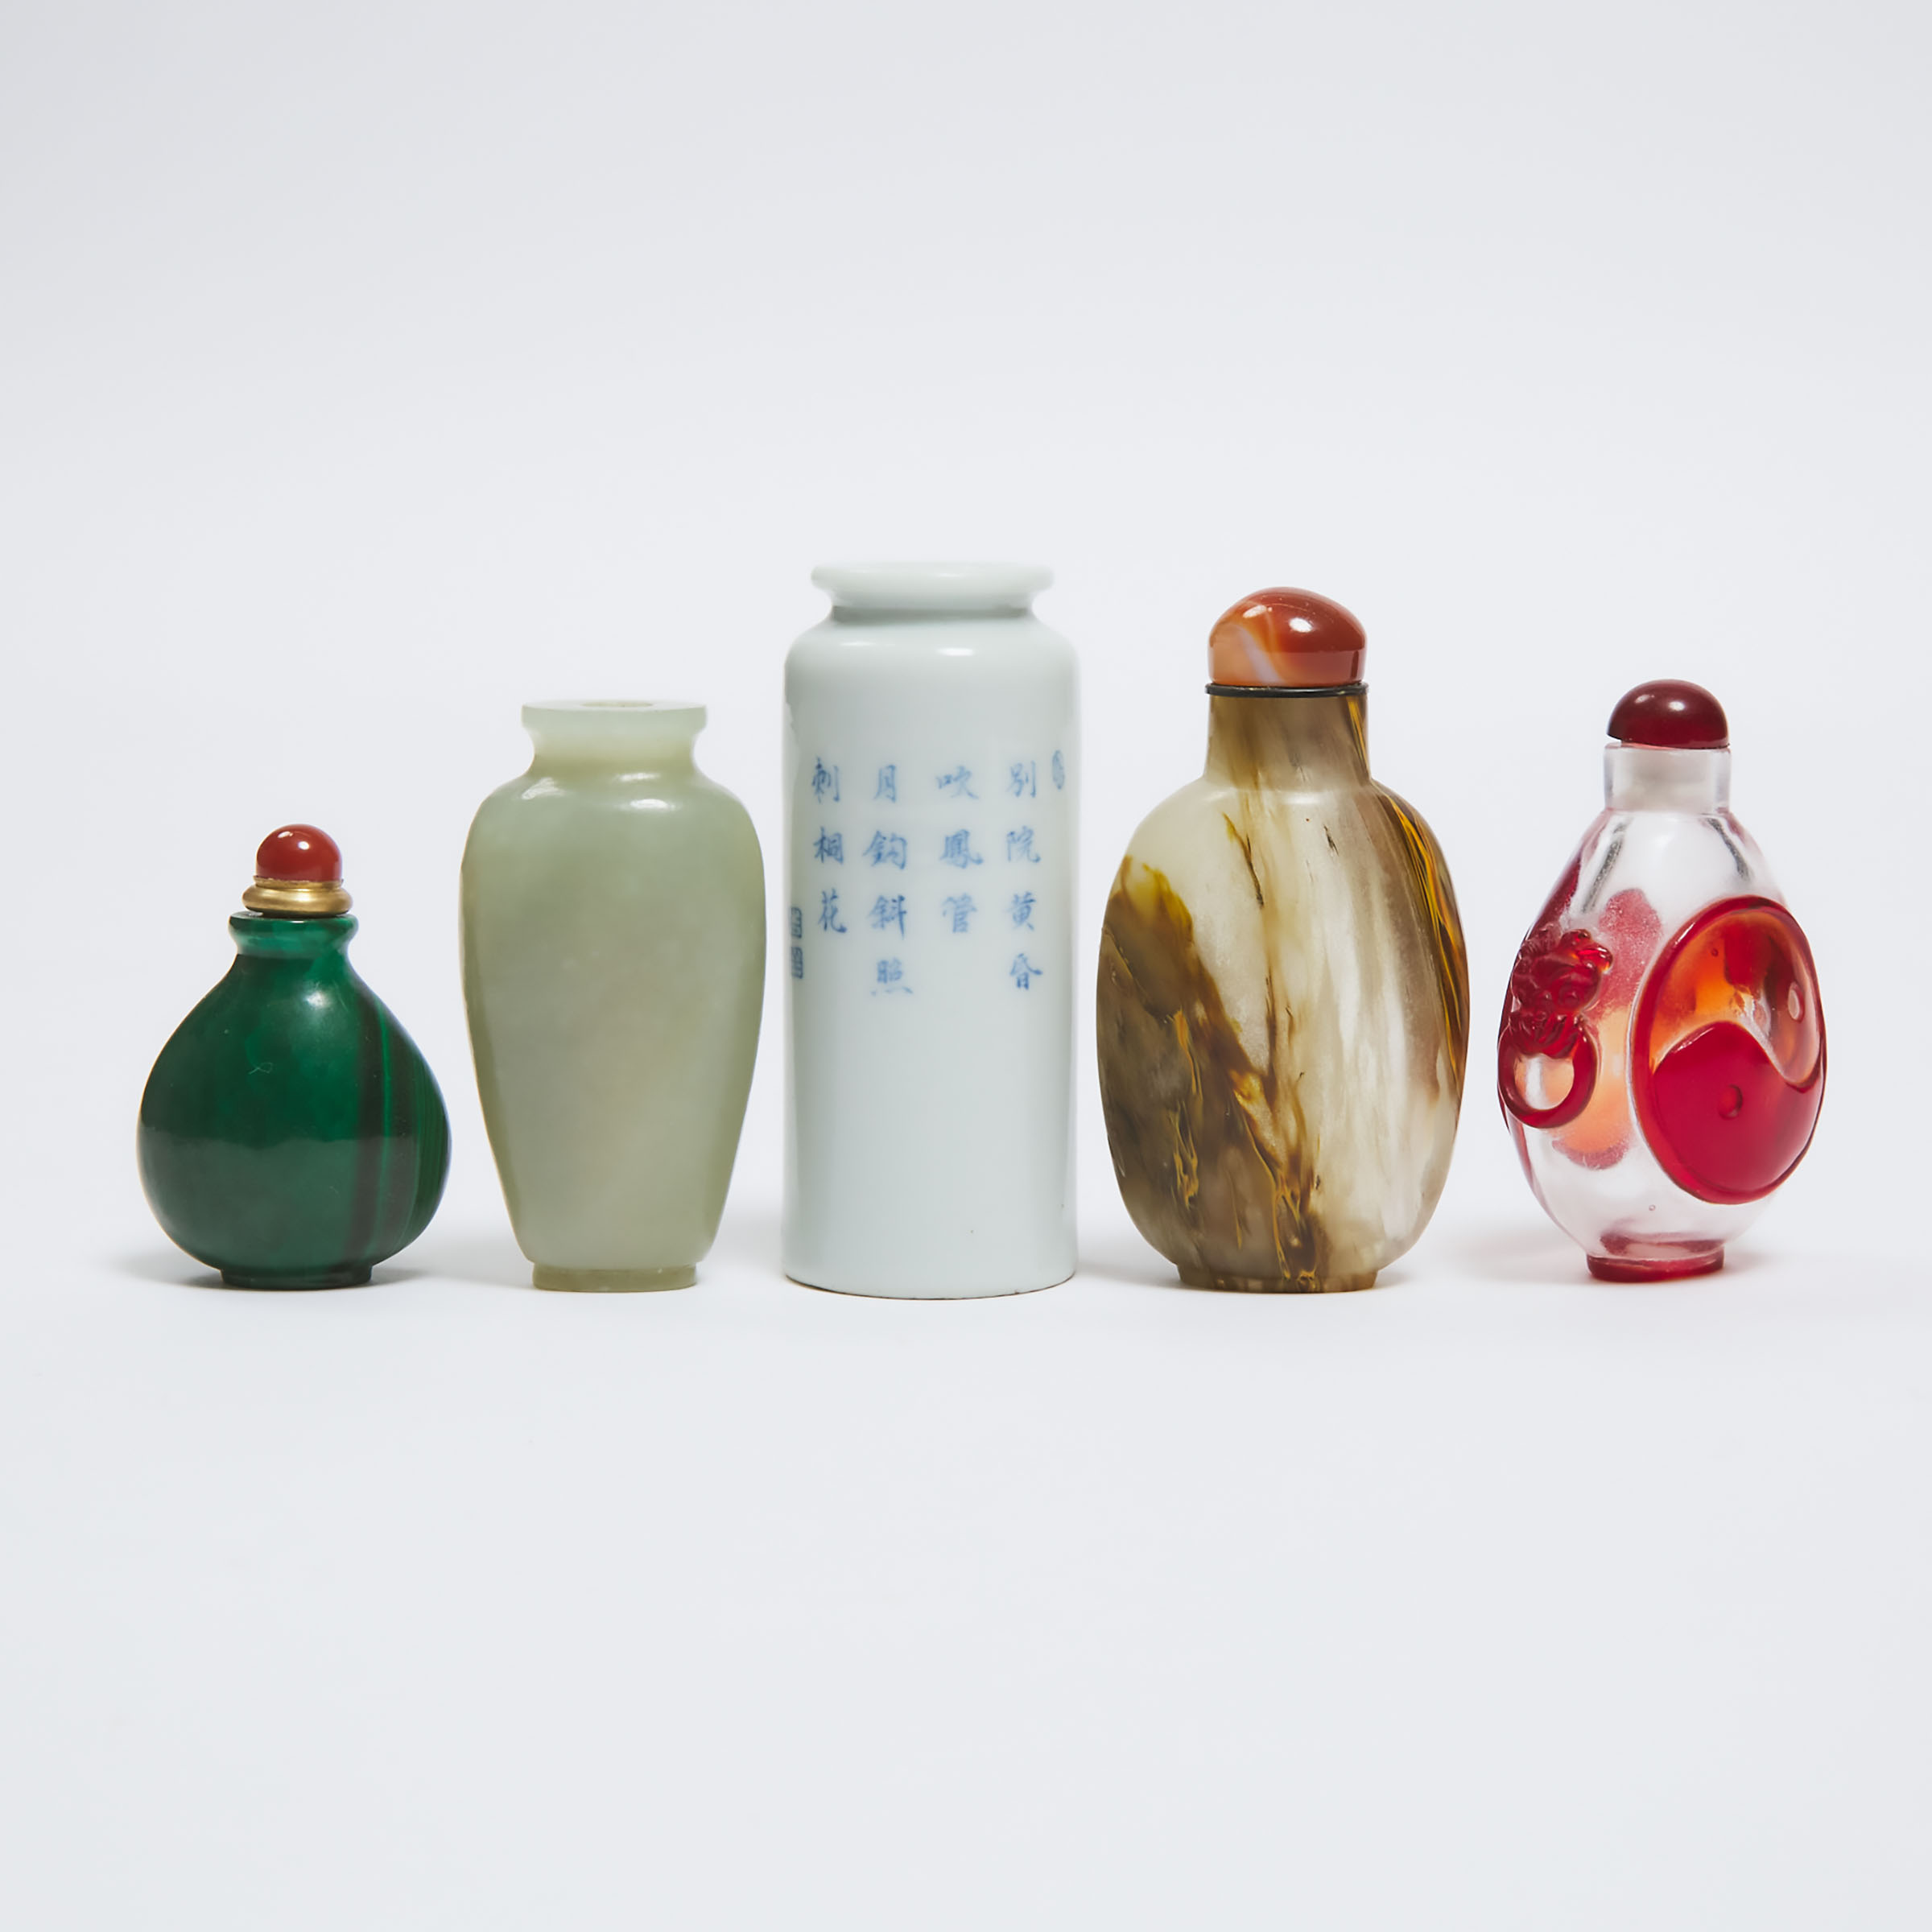 A Group of Five Snuff Bottles, 19th Century and Later